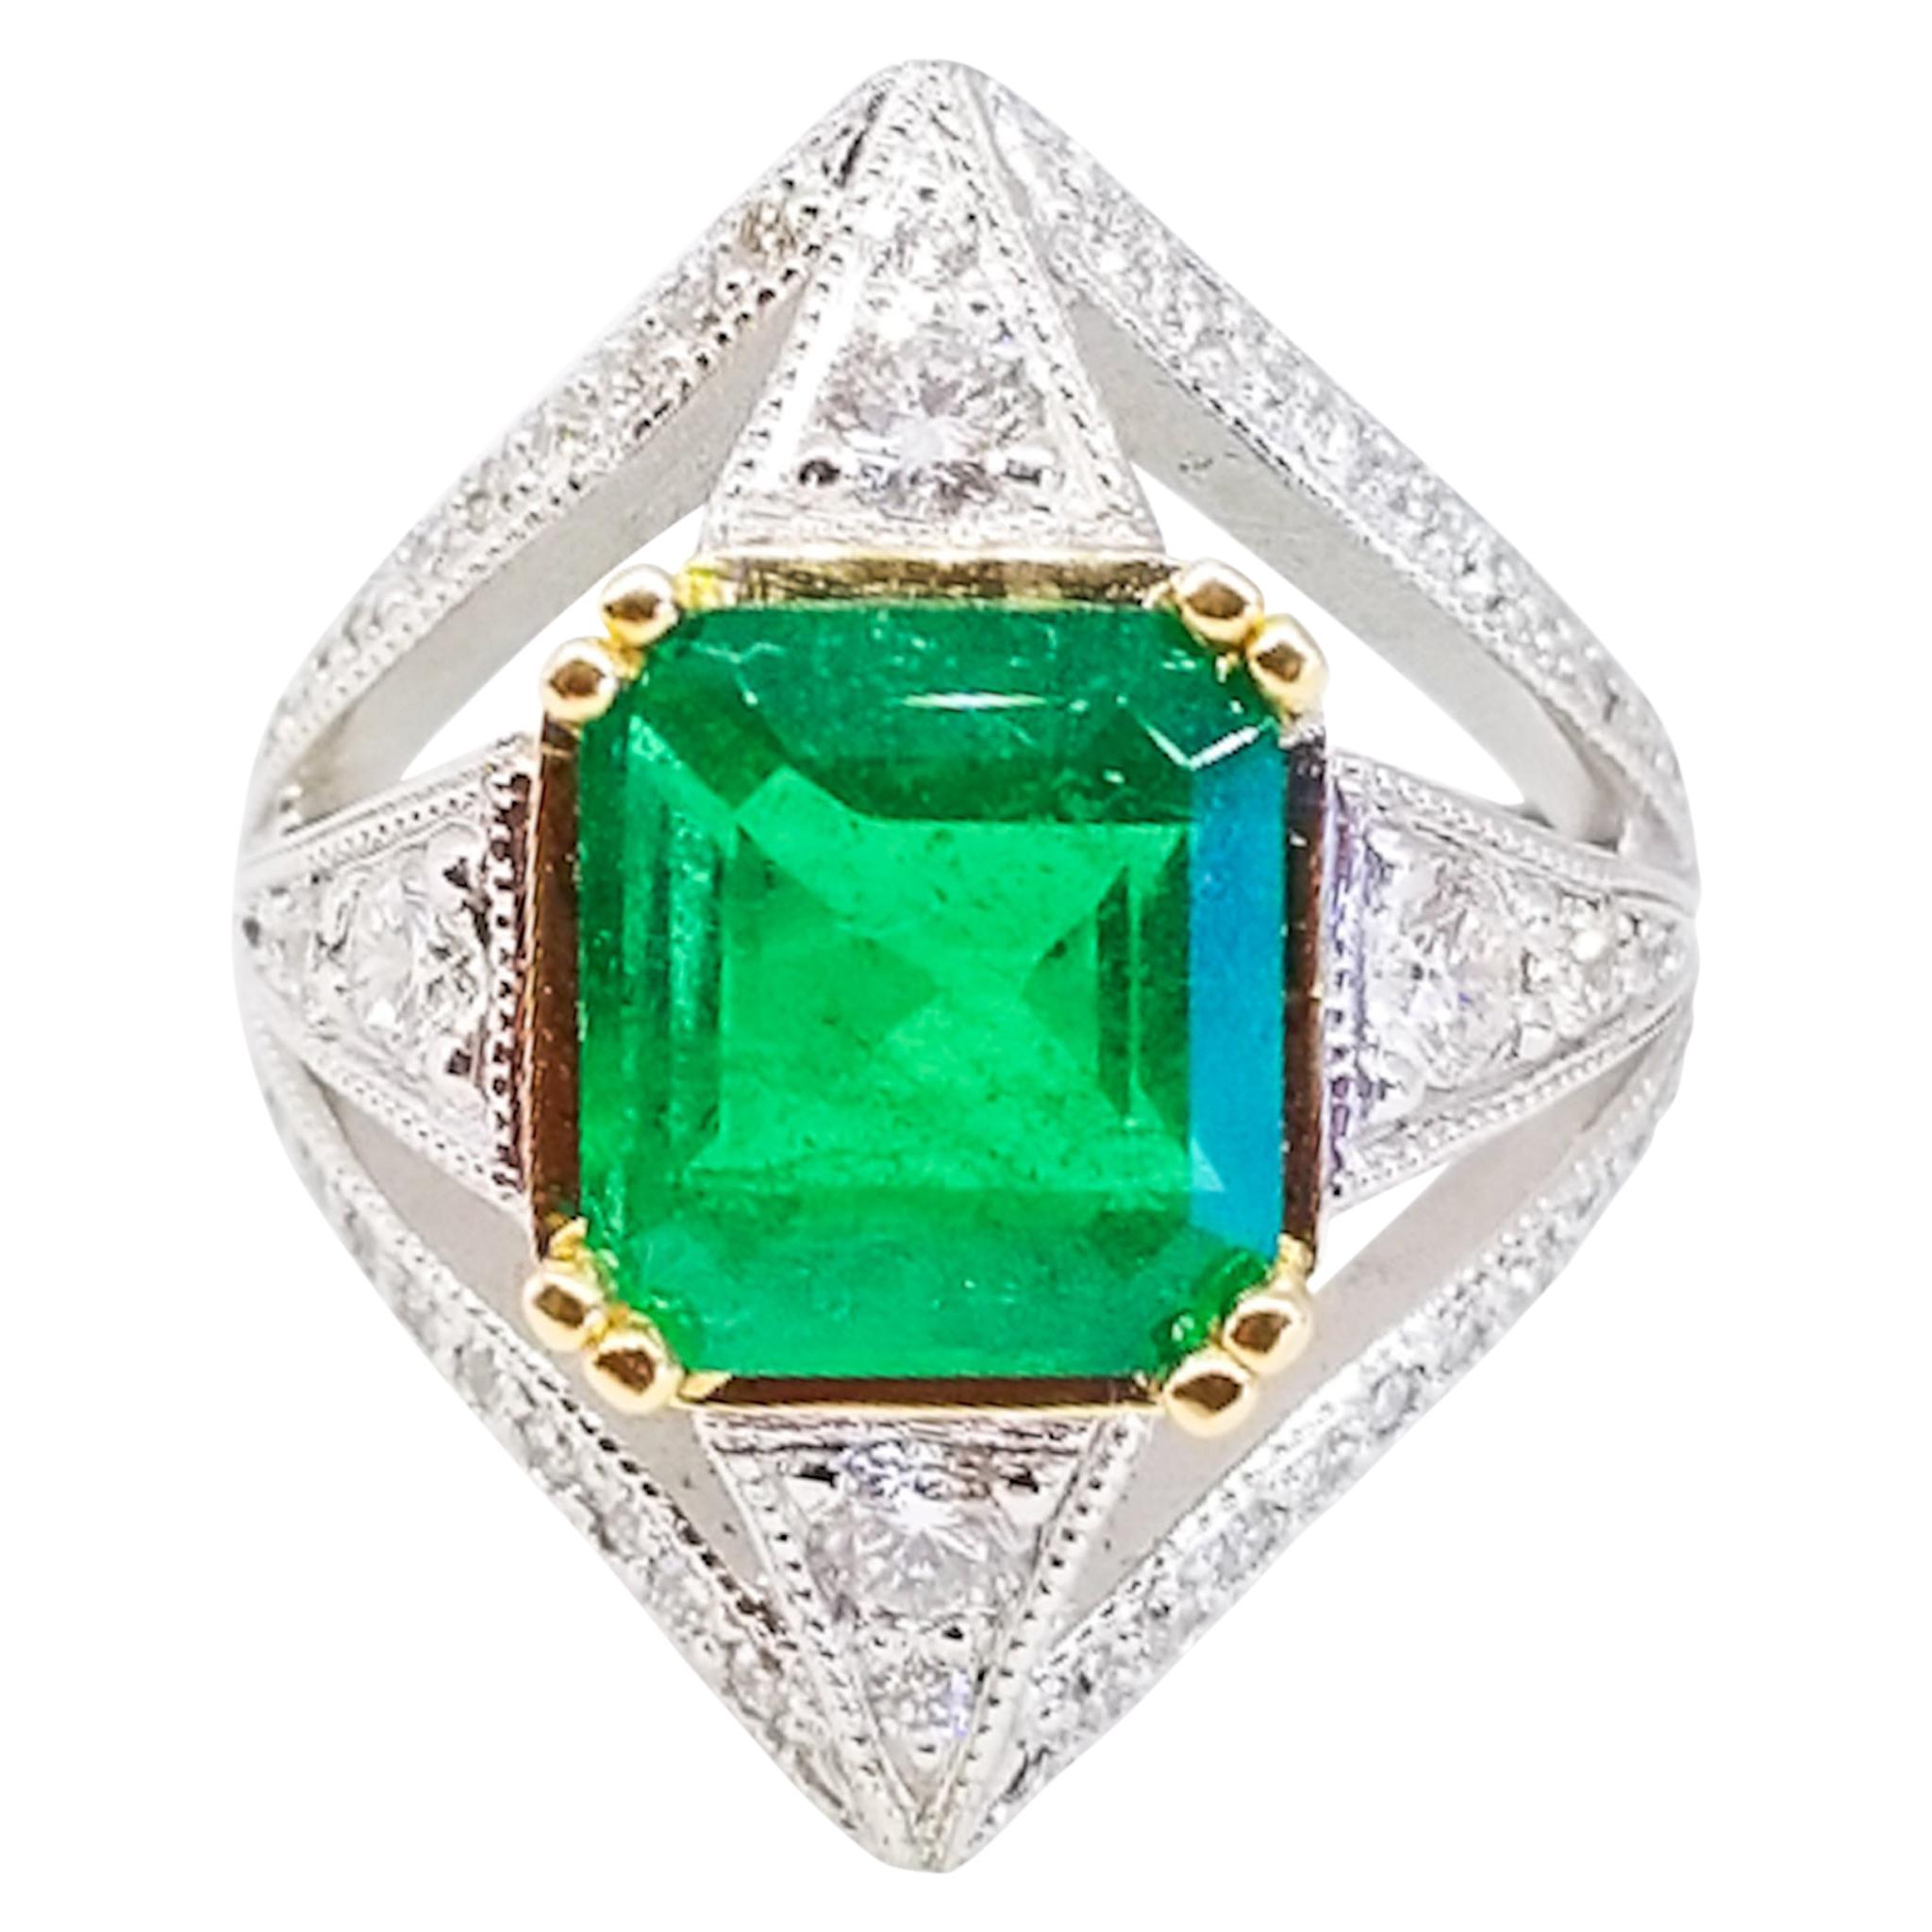 4.26 Carat Colombian Green Emerald Diamond One of a Kind Tom Castor Ring 18K